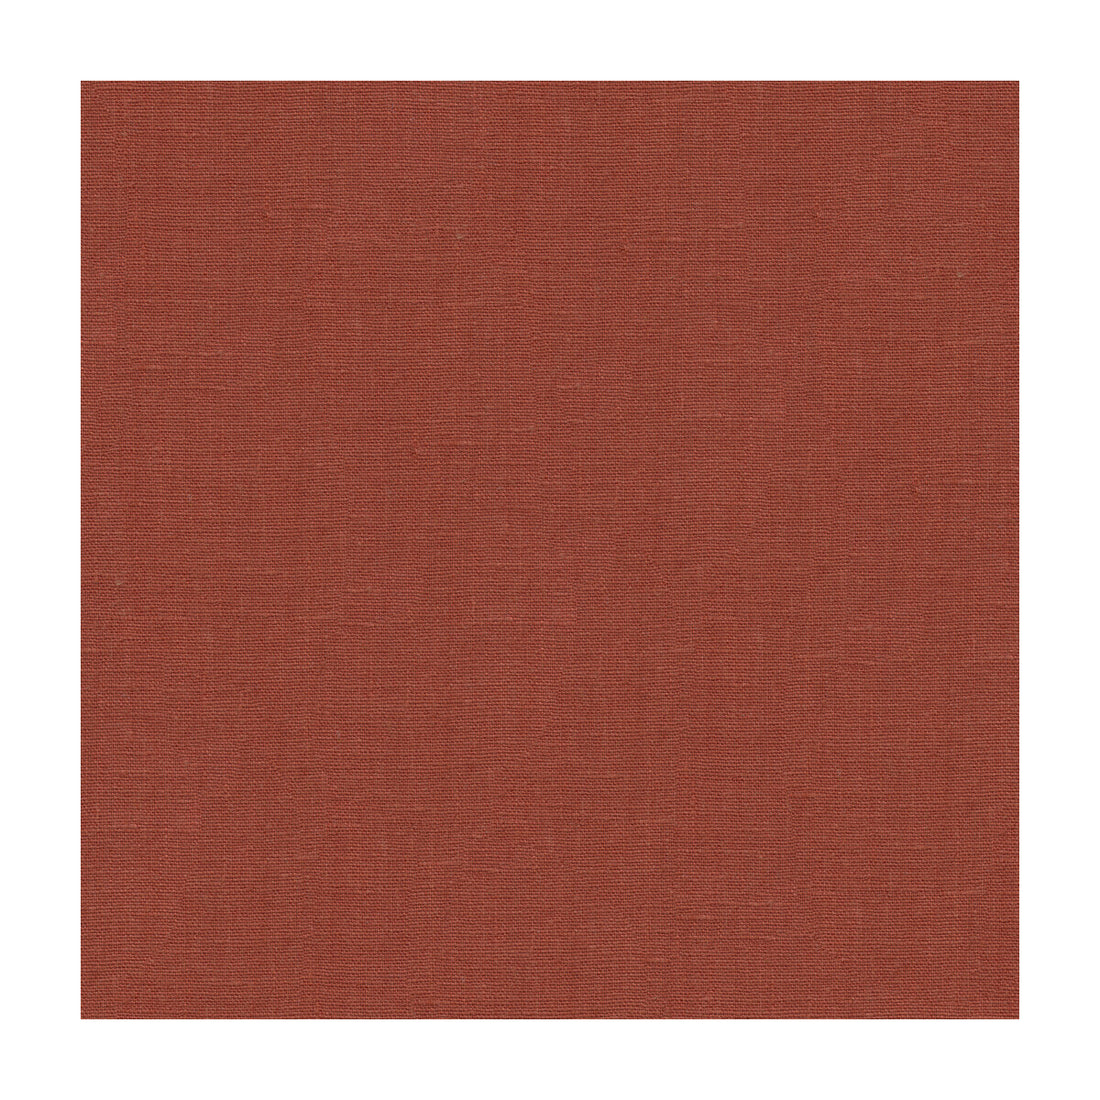 Dublin fabric in rust color - pattern 32344.24.0 - by Kravet Basics in the Perfect Plains collection